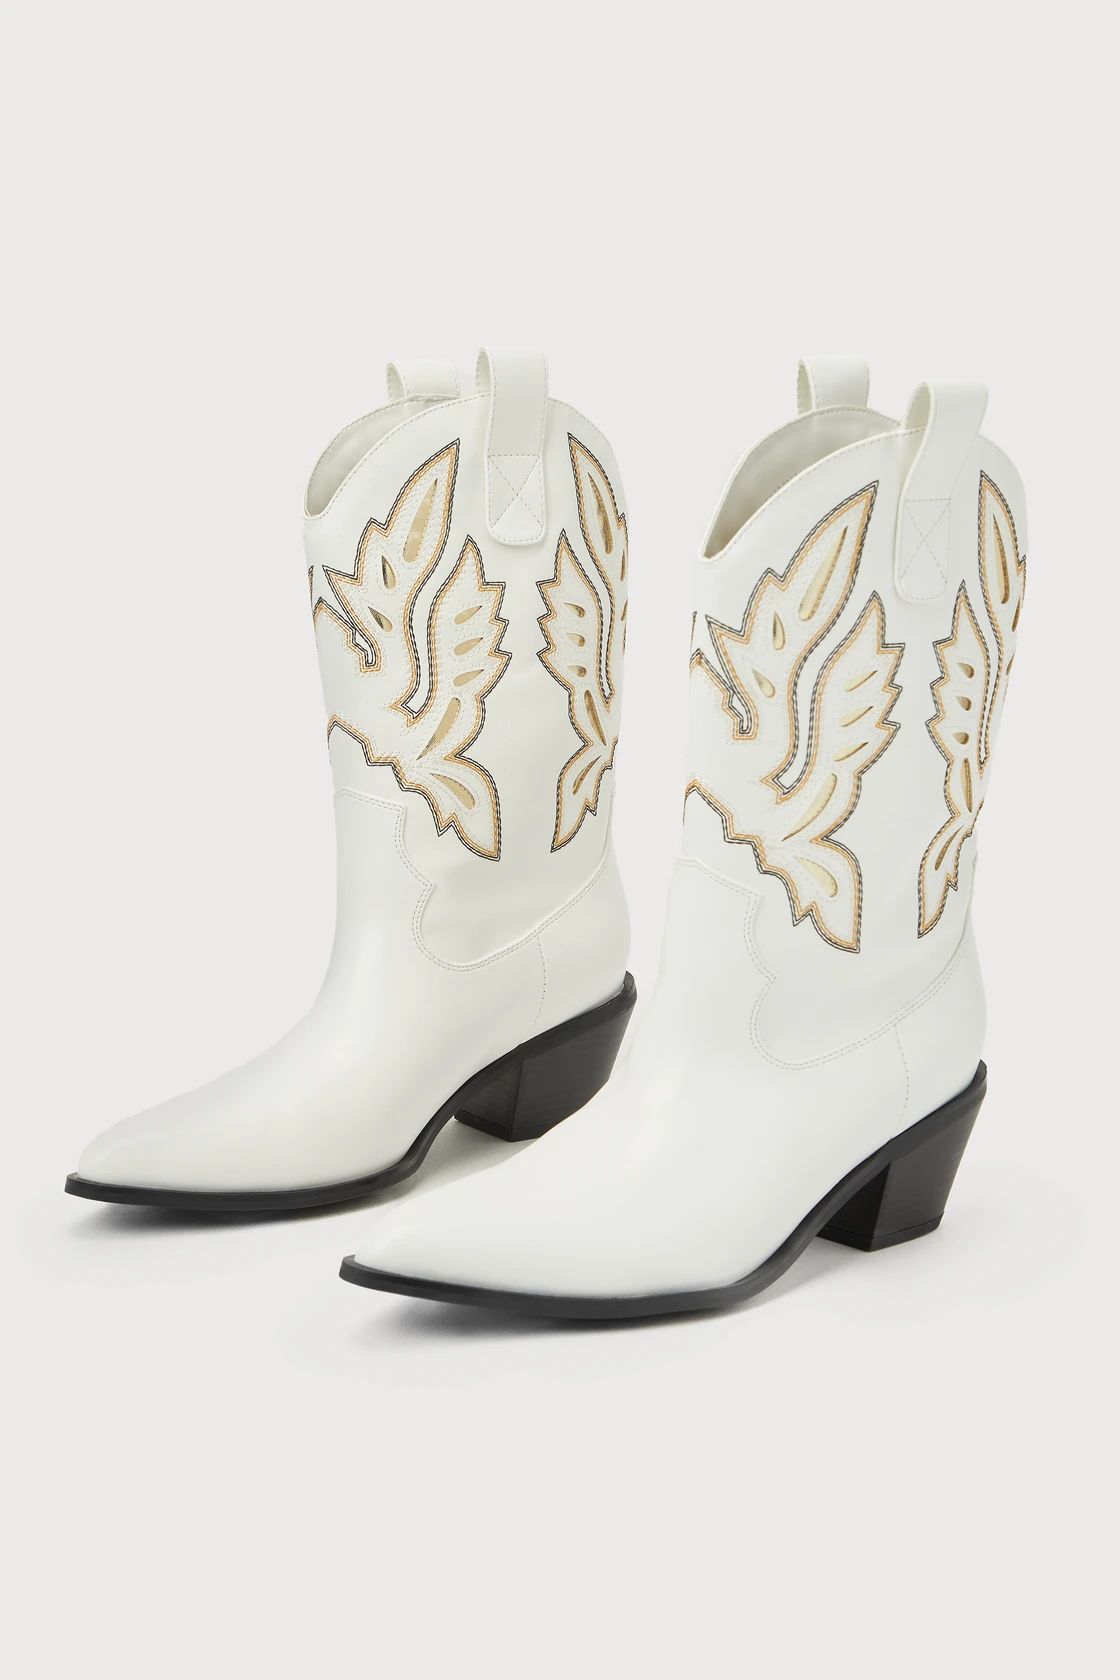 Remmington White Pointed-Toe Western Ankle Boots | Lulus